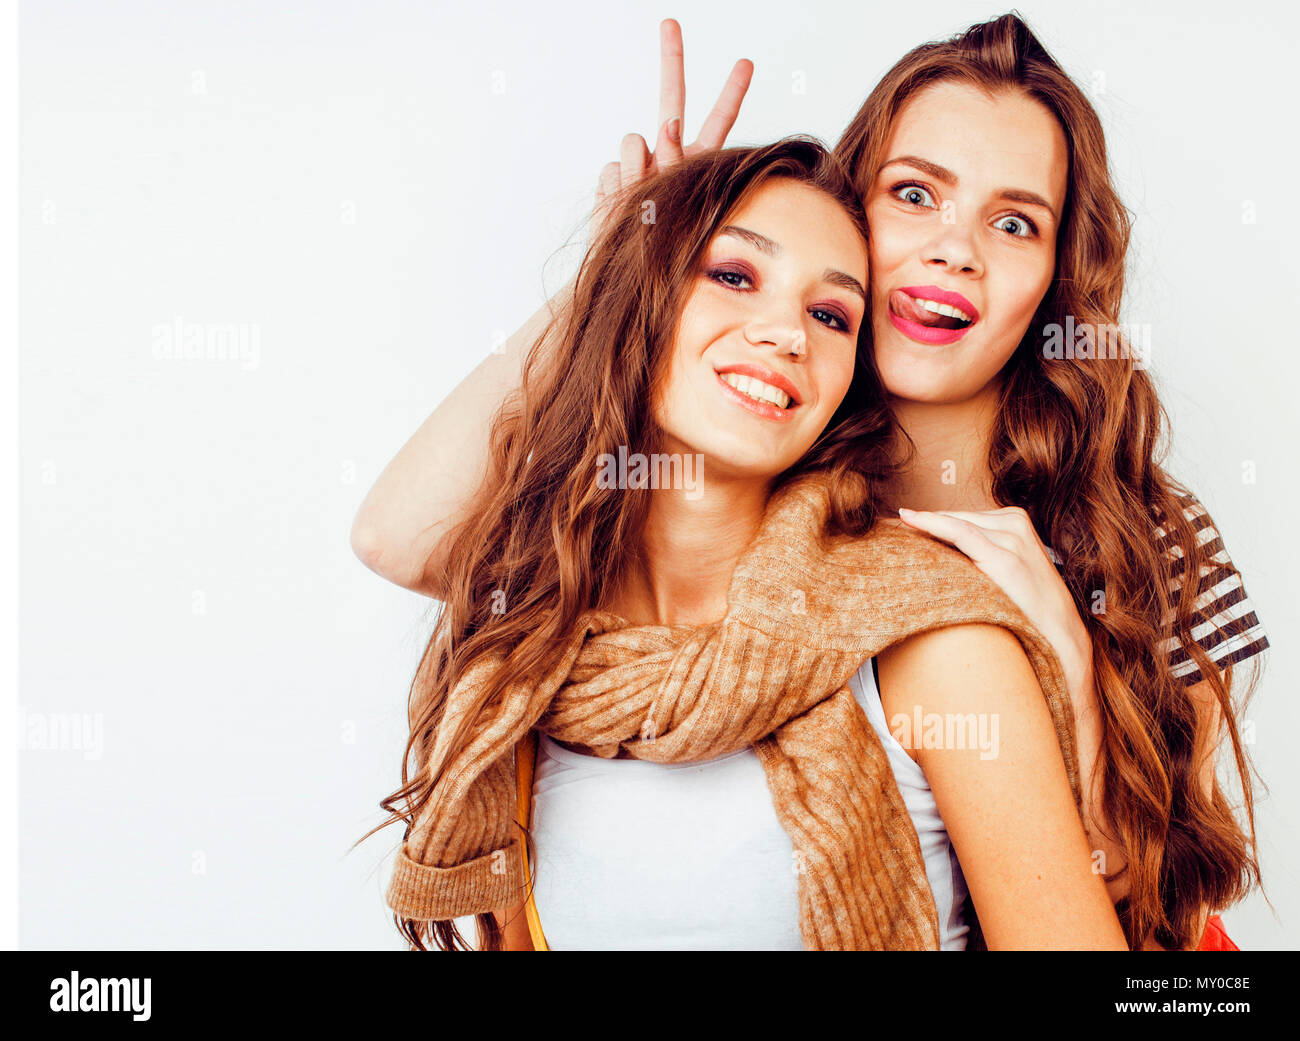 Cute poses for 2 friends | Friend poses photography, Fashion poses, Friends  poses